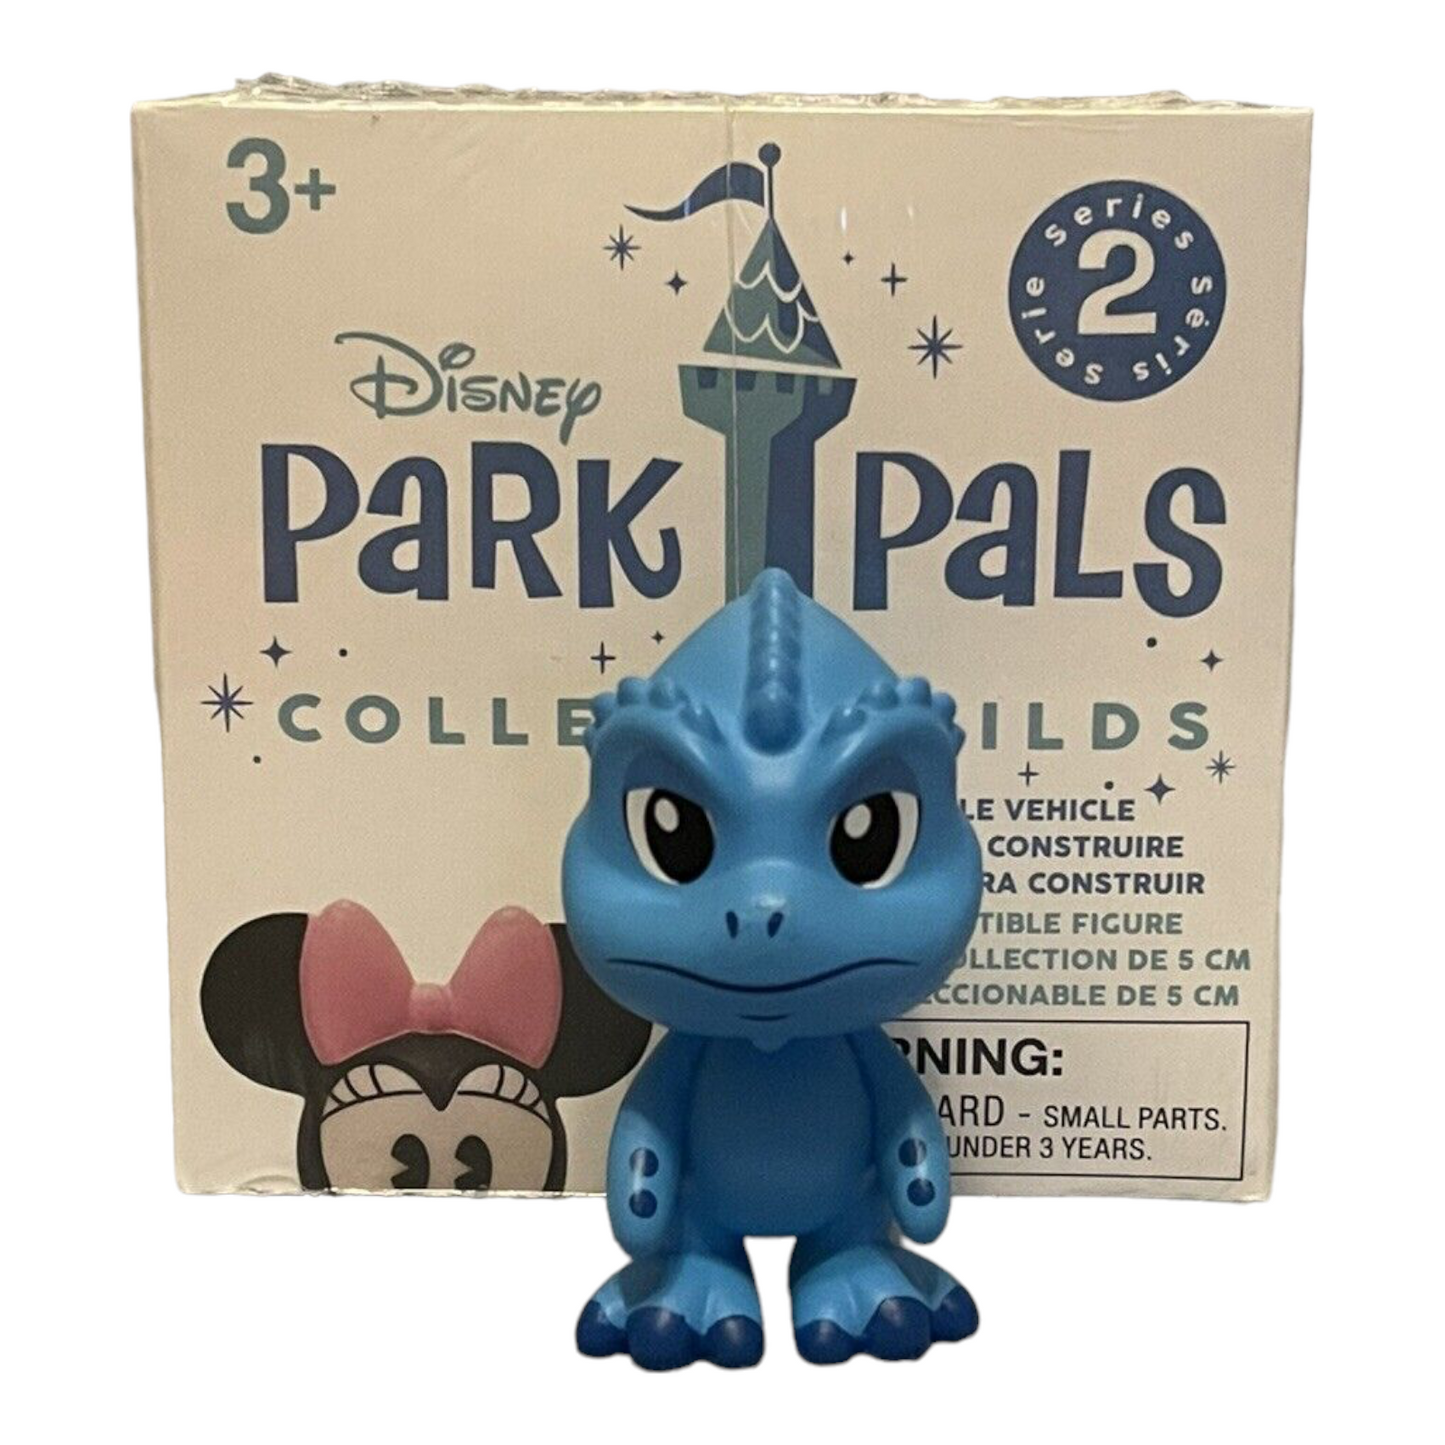 Park Pals Collectabuilds Mystery Box Series 2